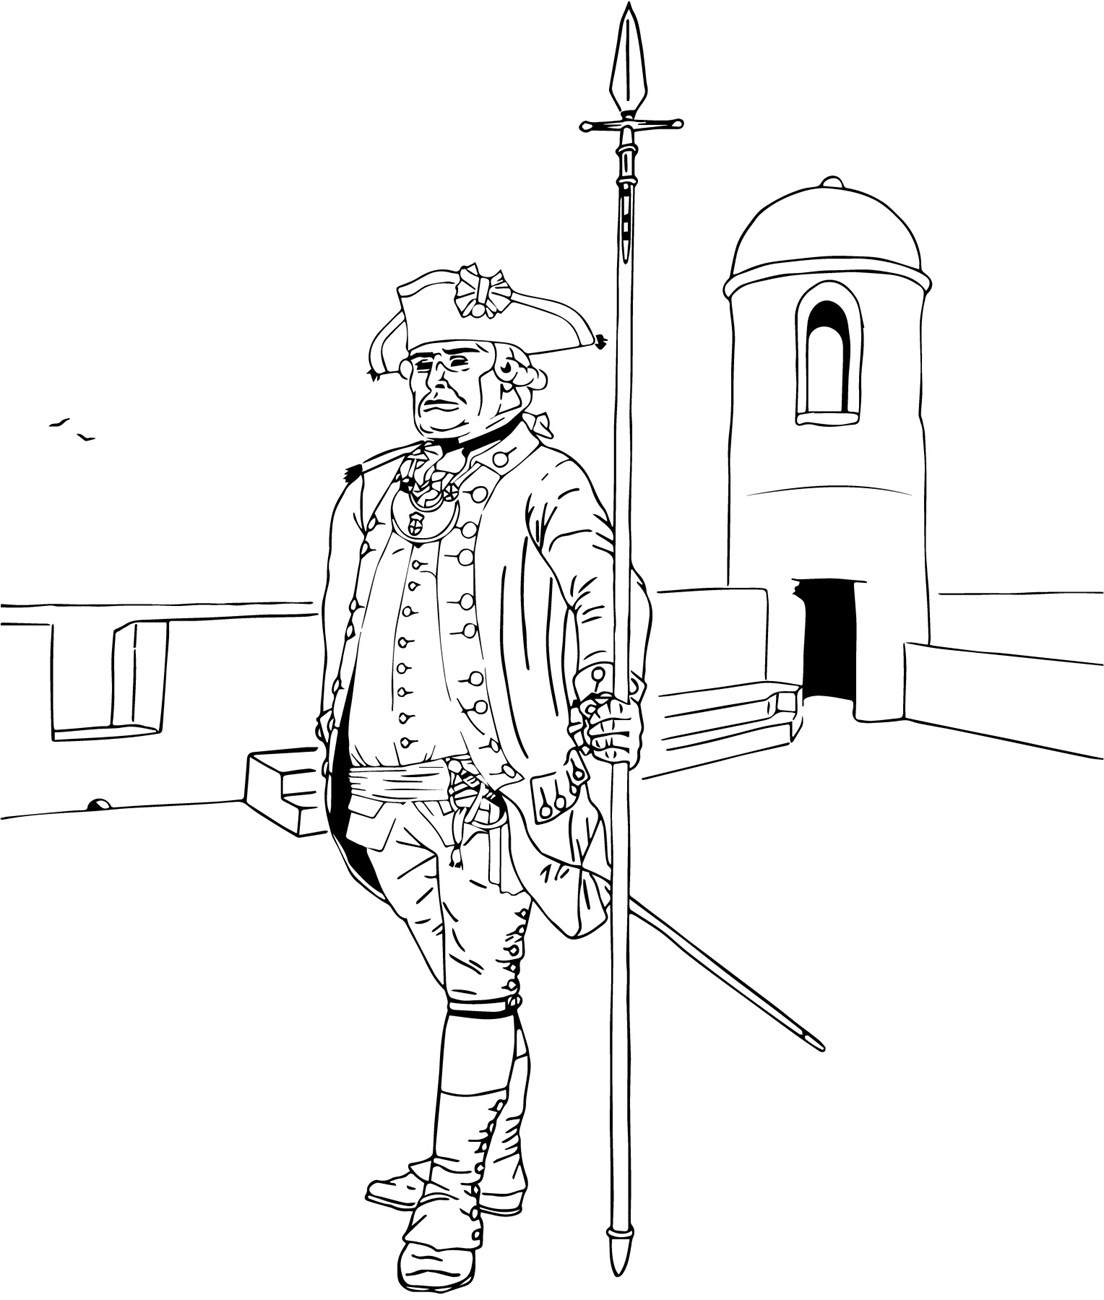 Coloring Page of 1776 English Officer in uniform on Castillo's gun deck.